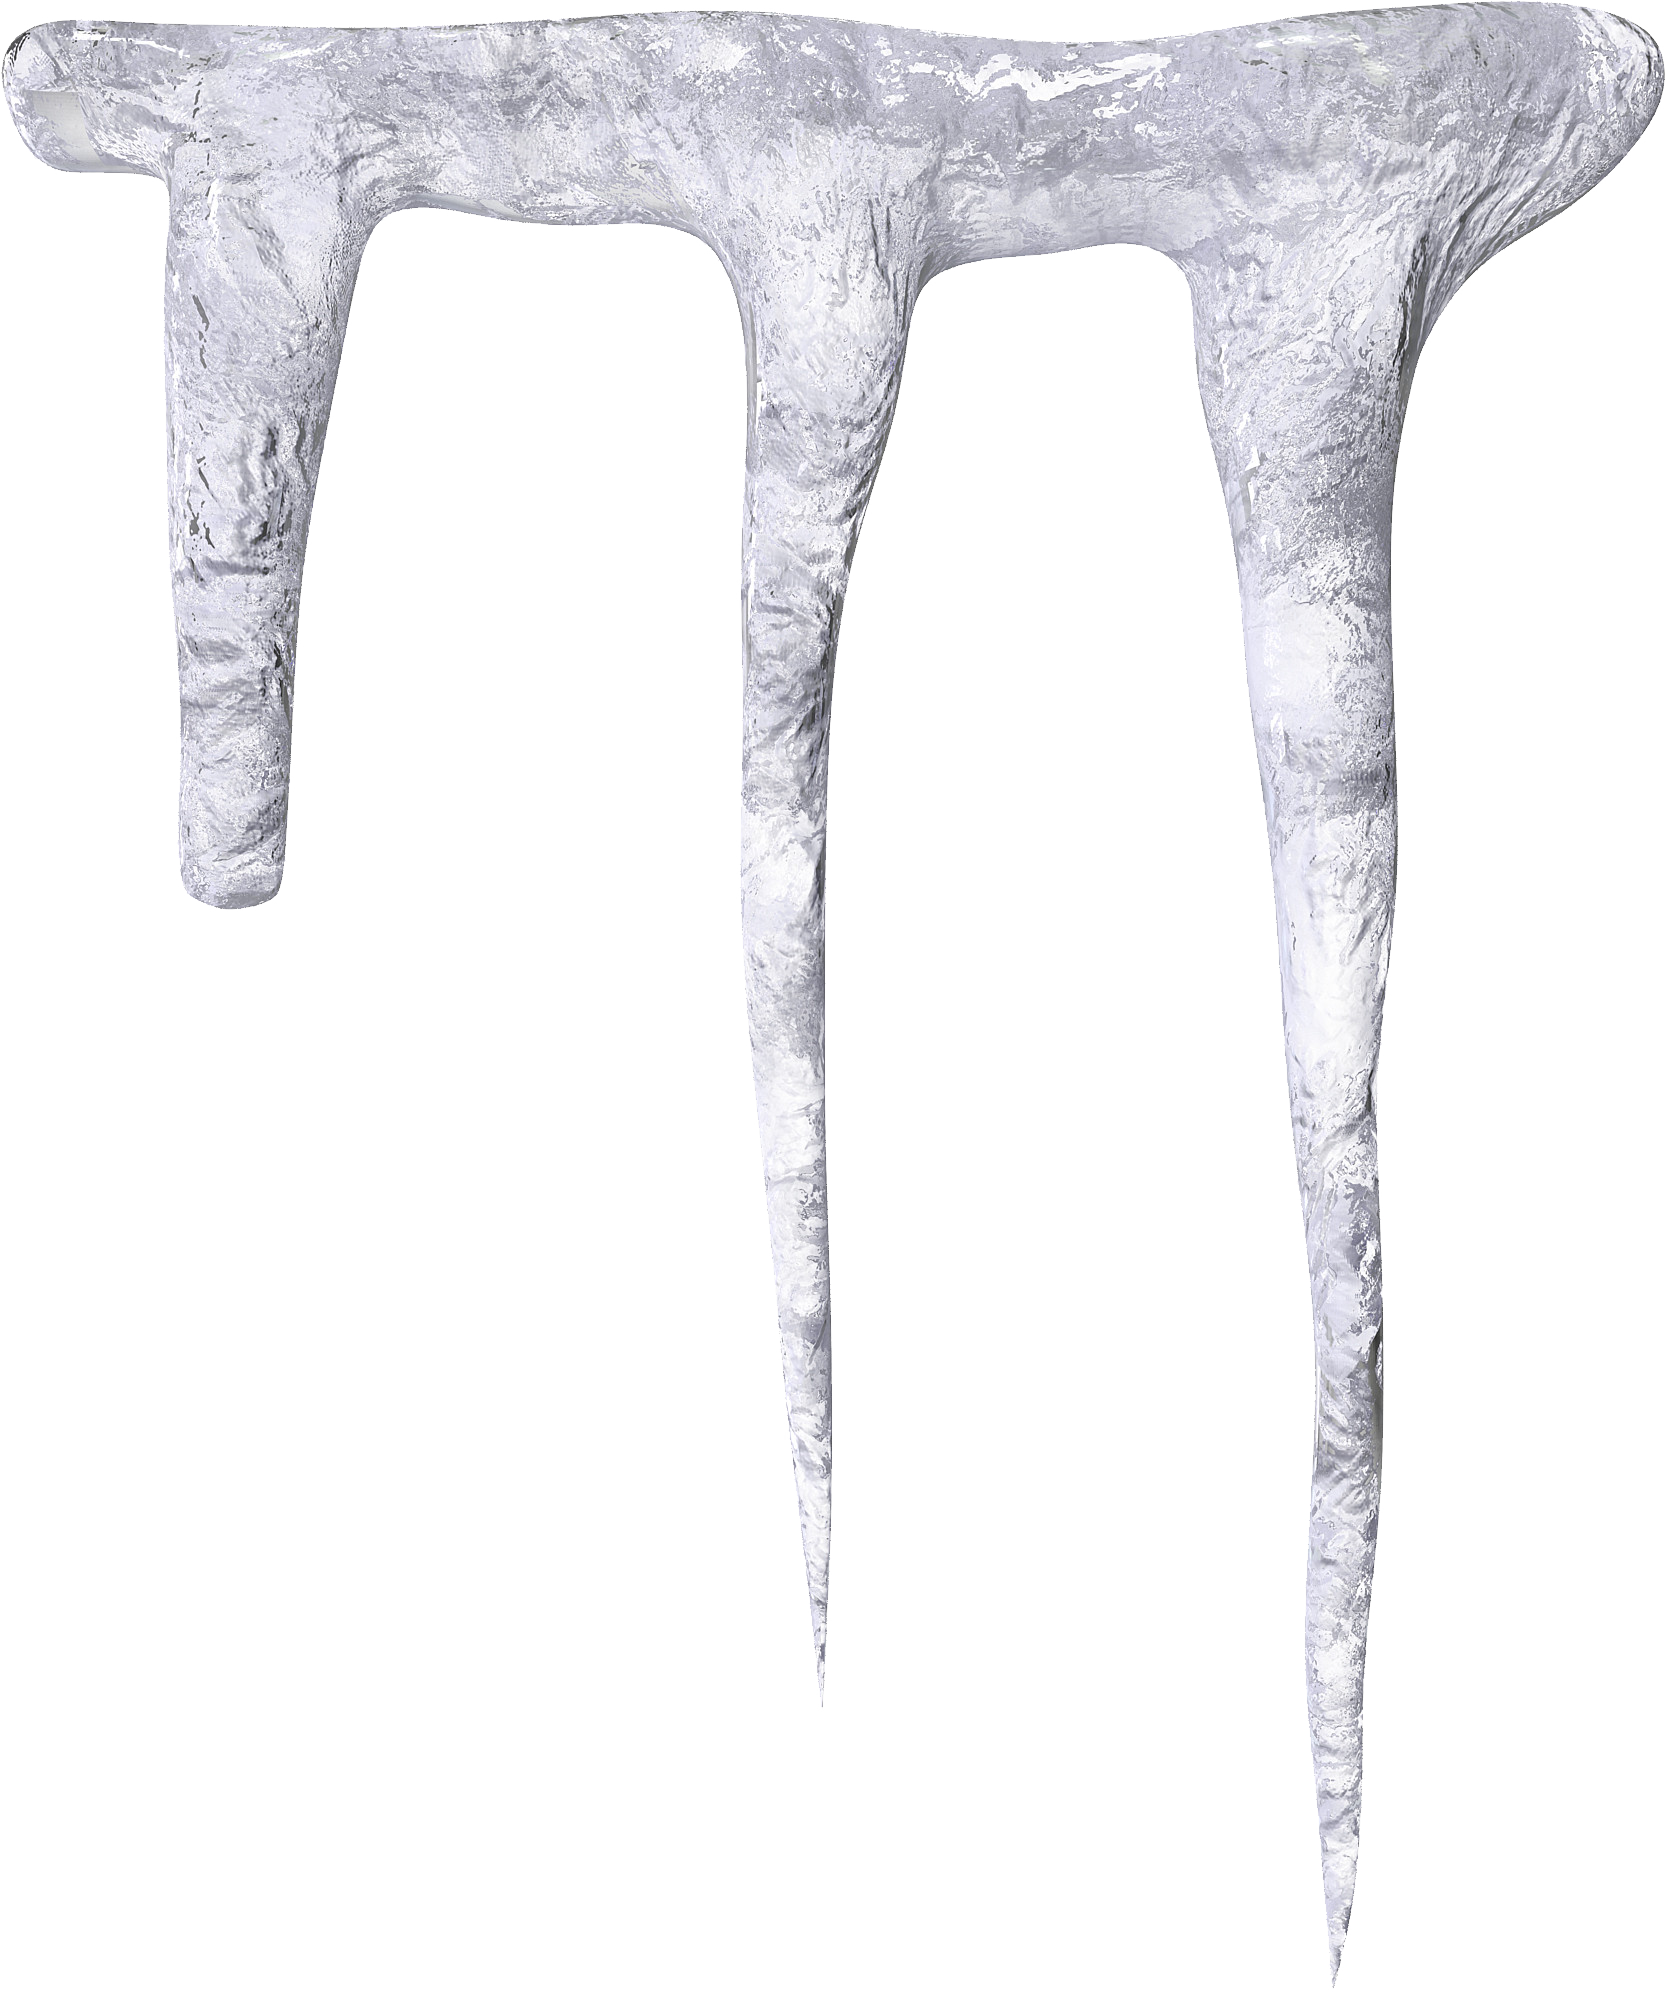 one clipart icicle